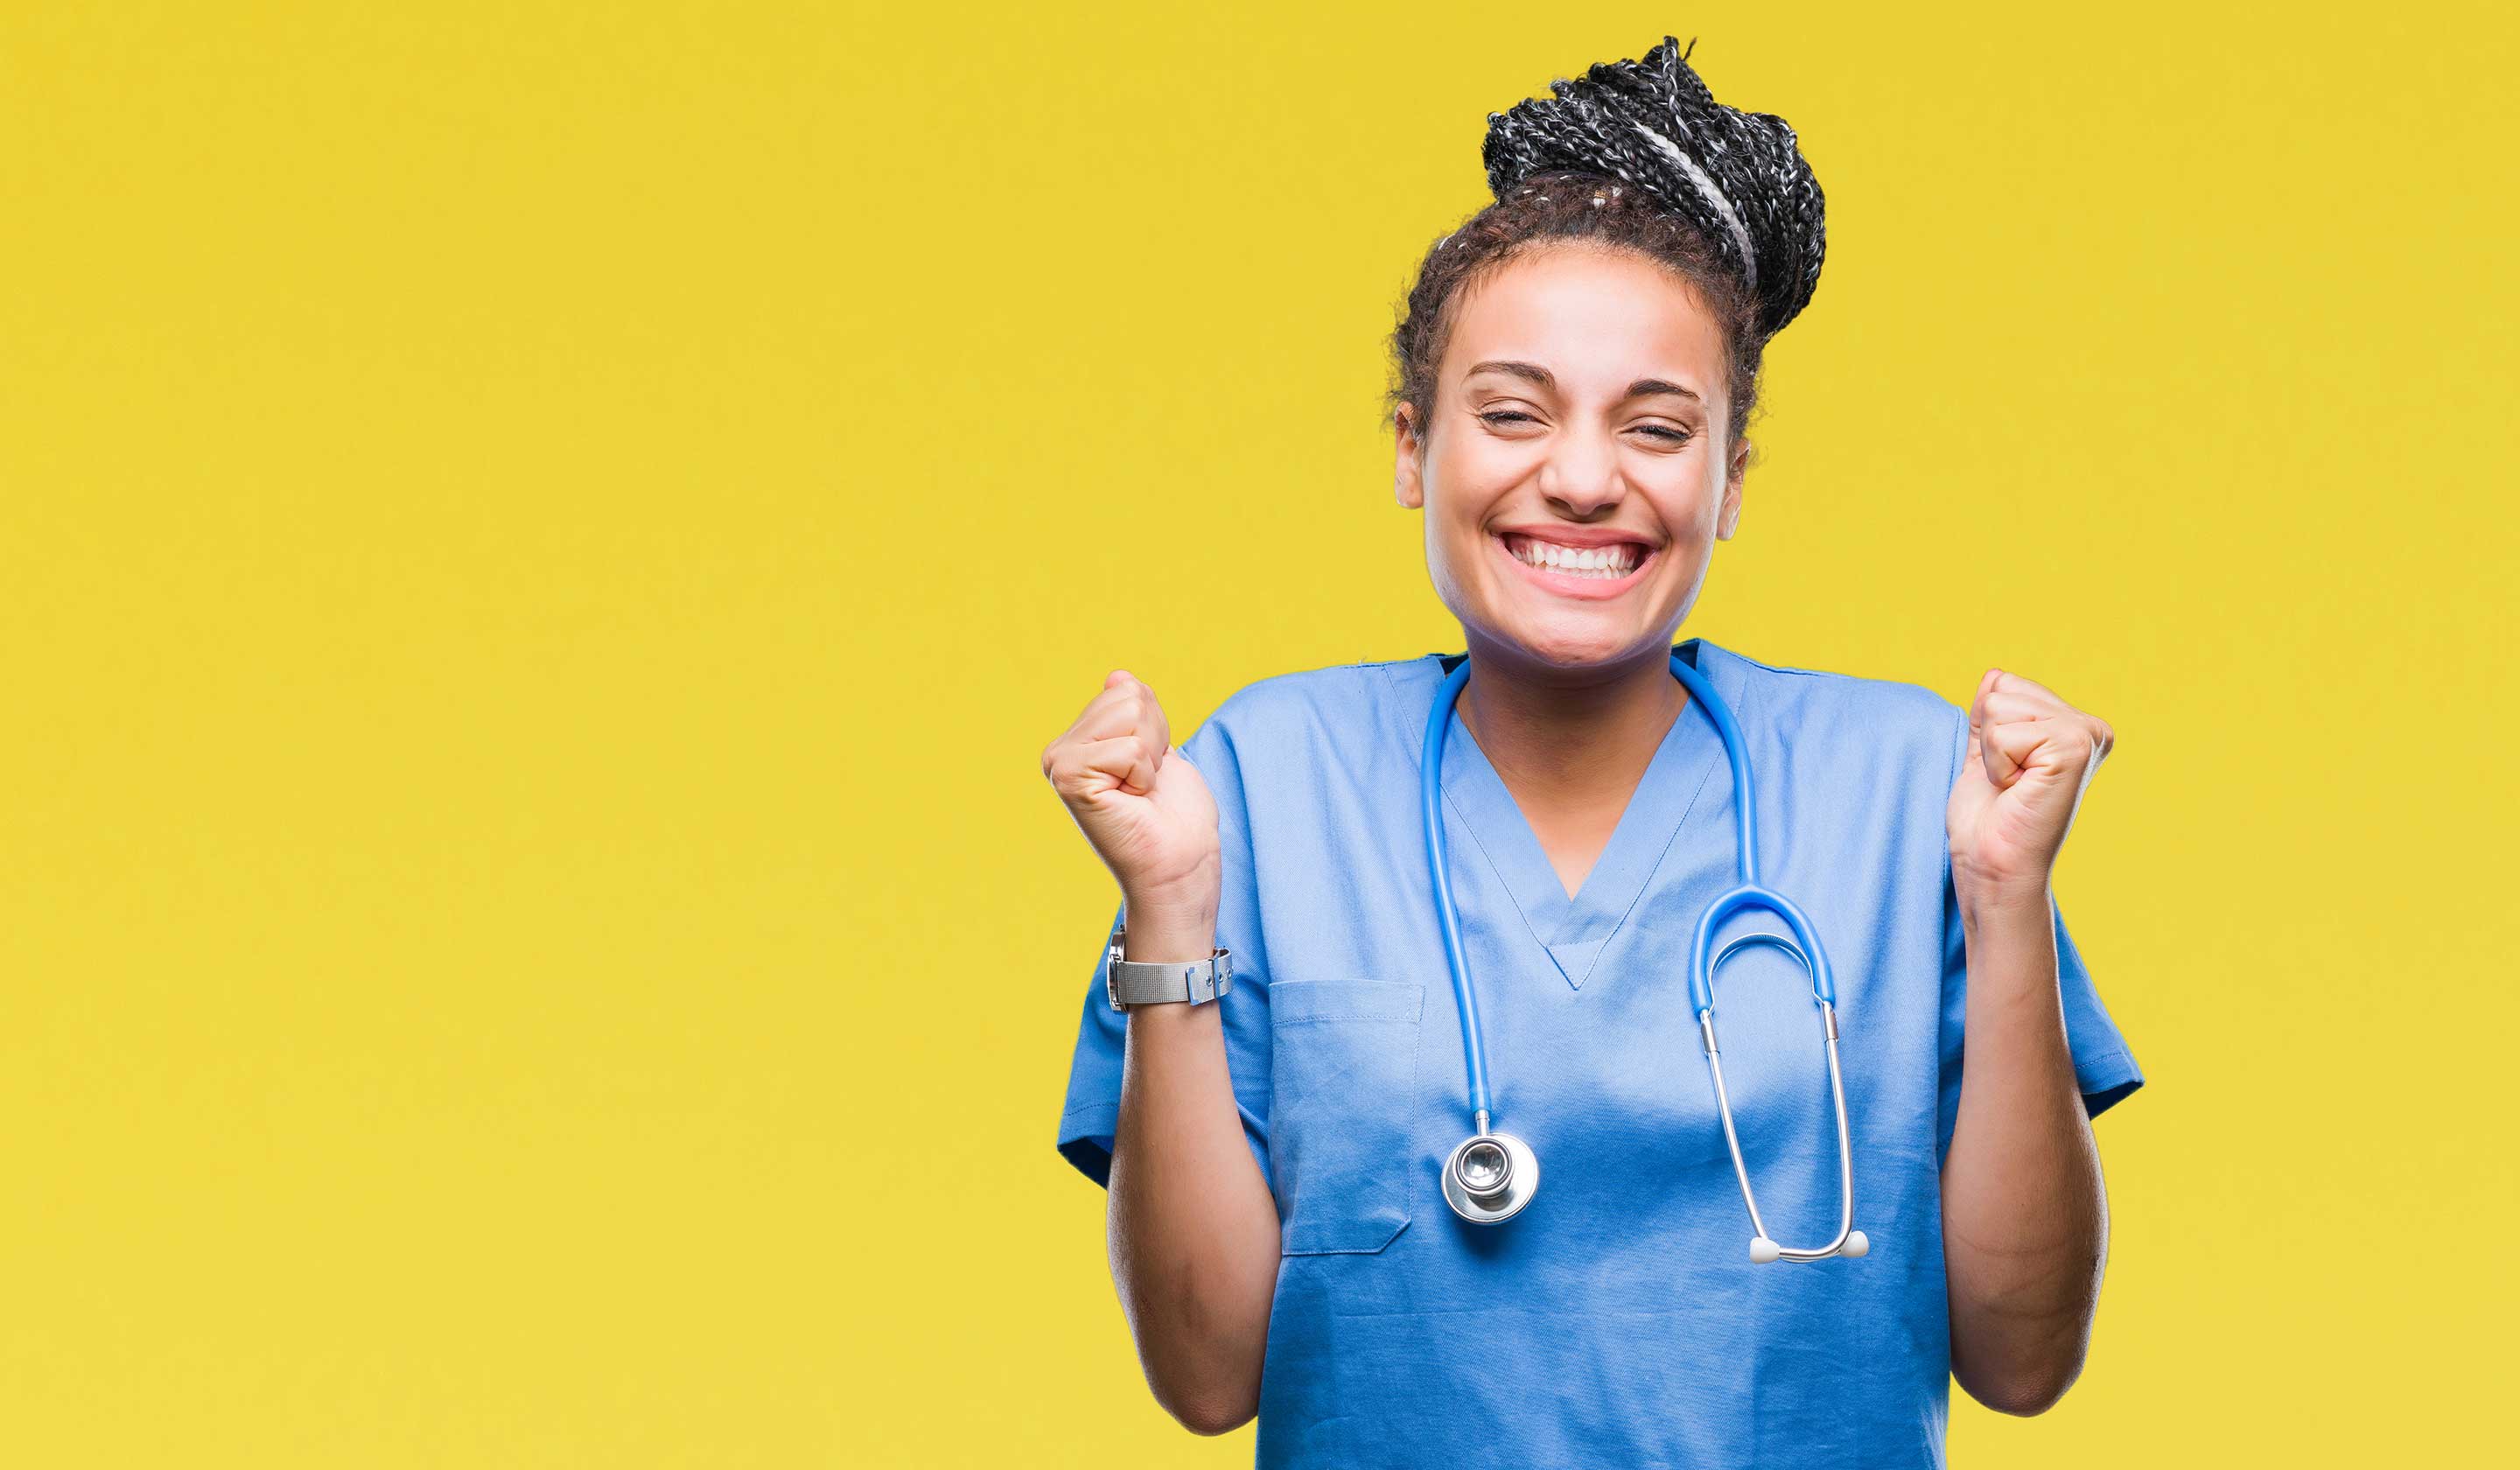 Top 3 Ways To Address Nursing Shortages For a Happier Workplace